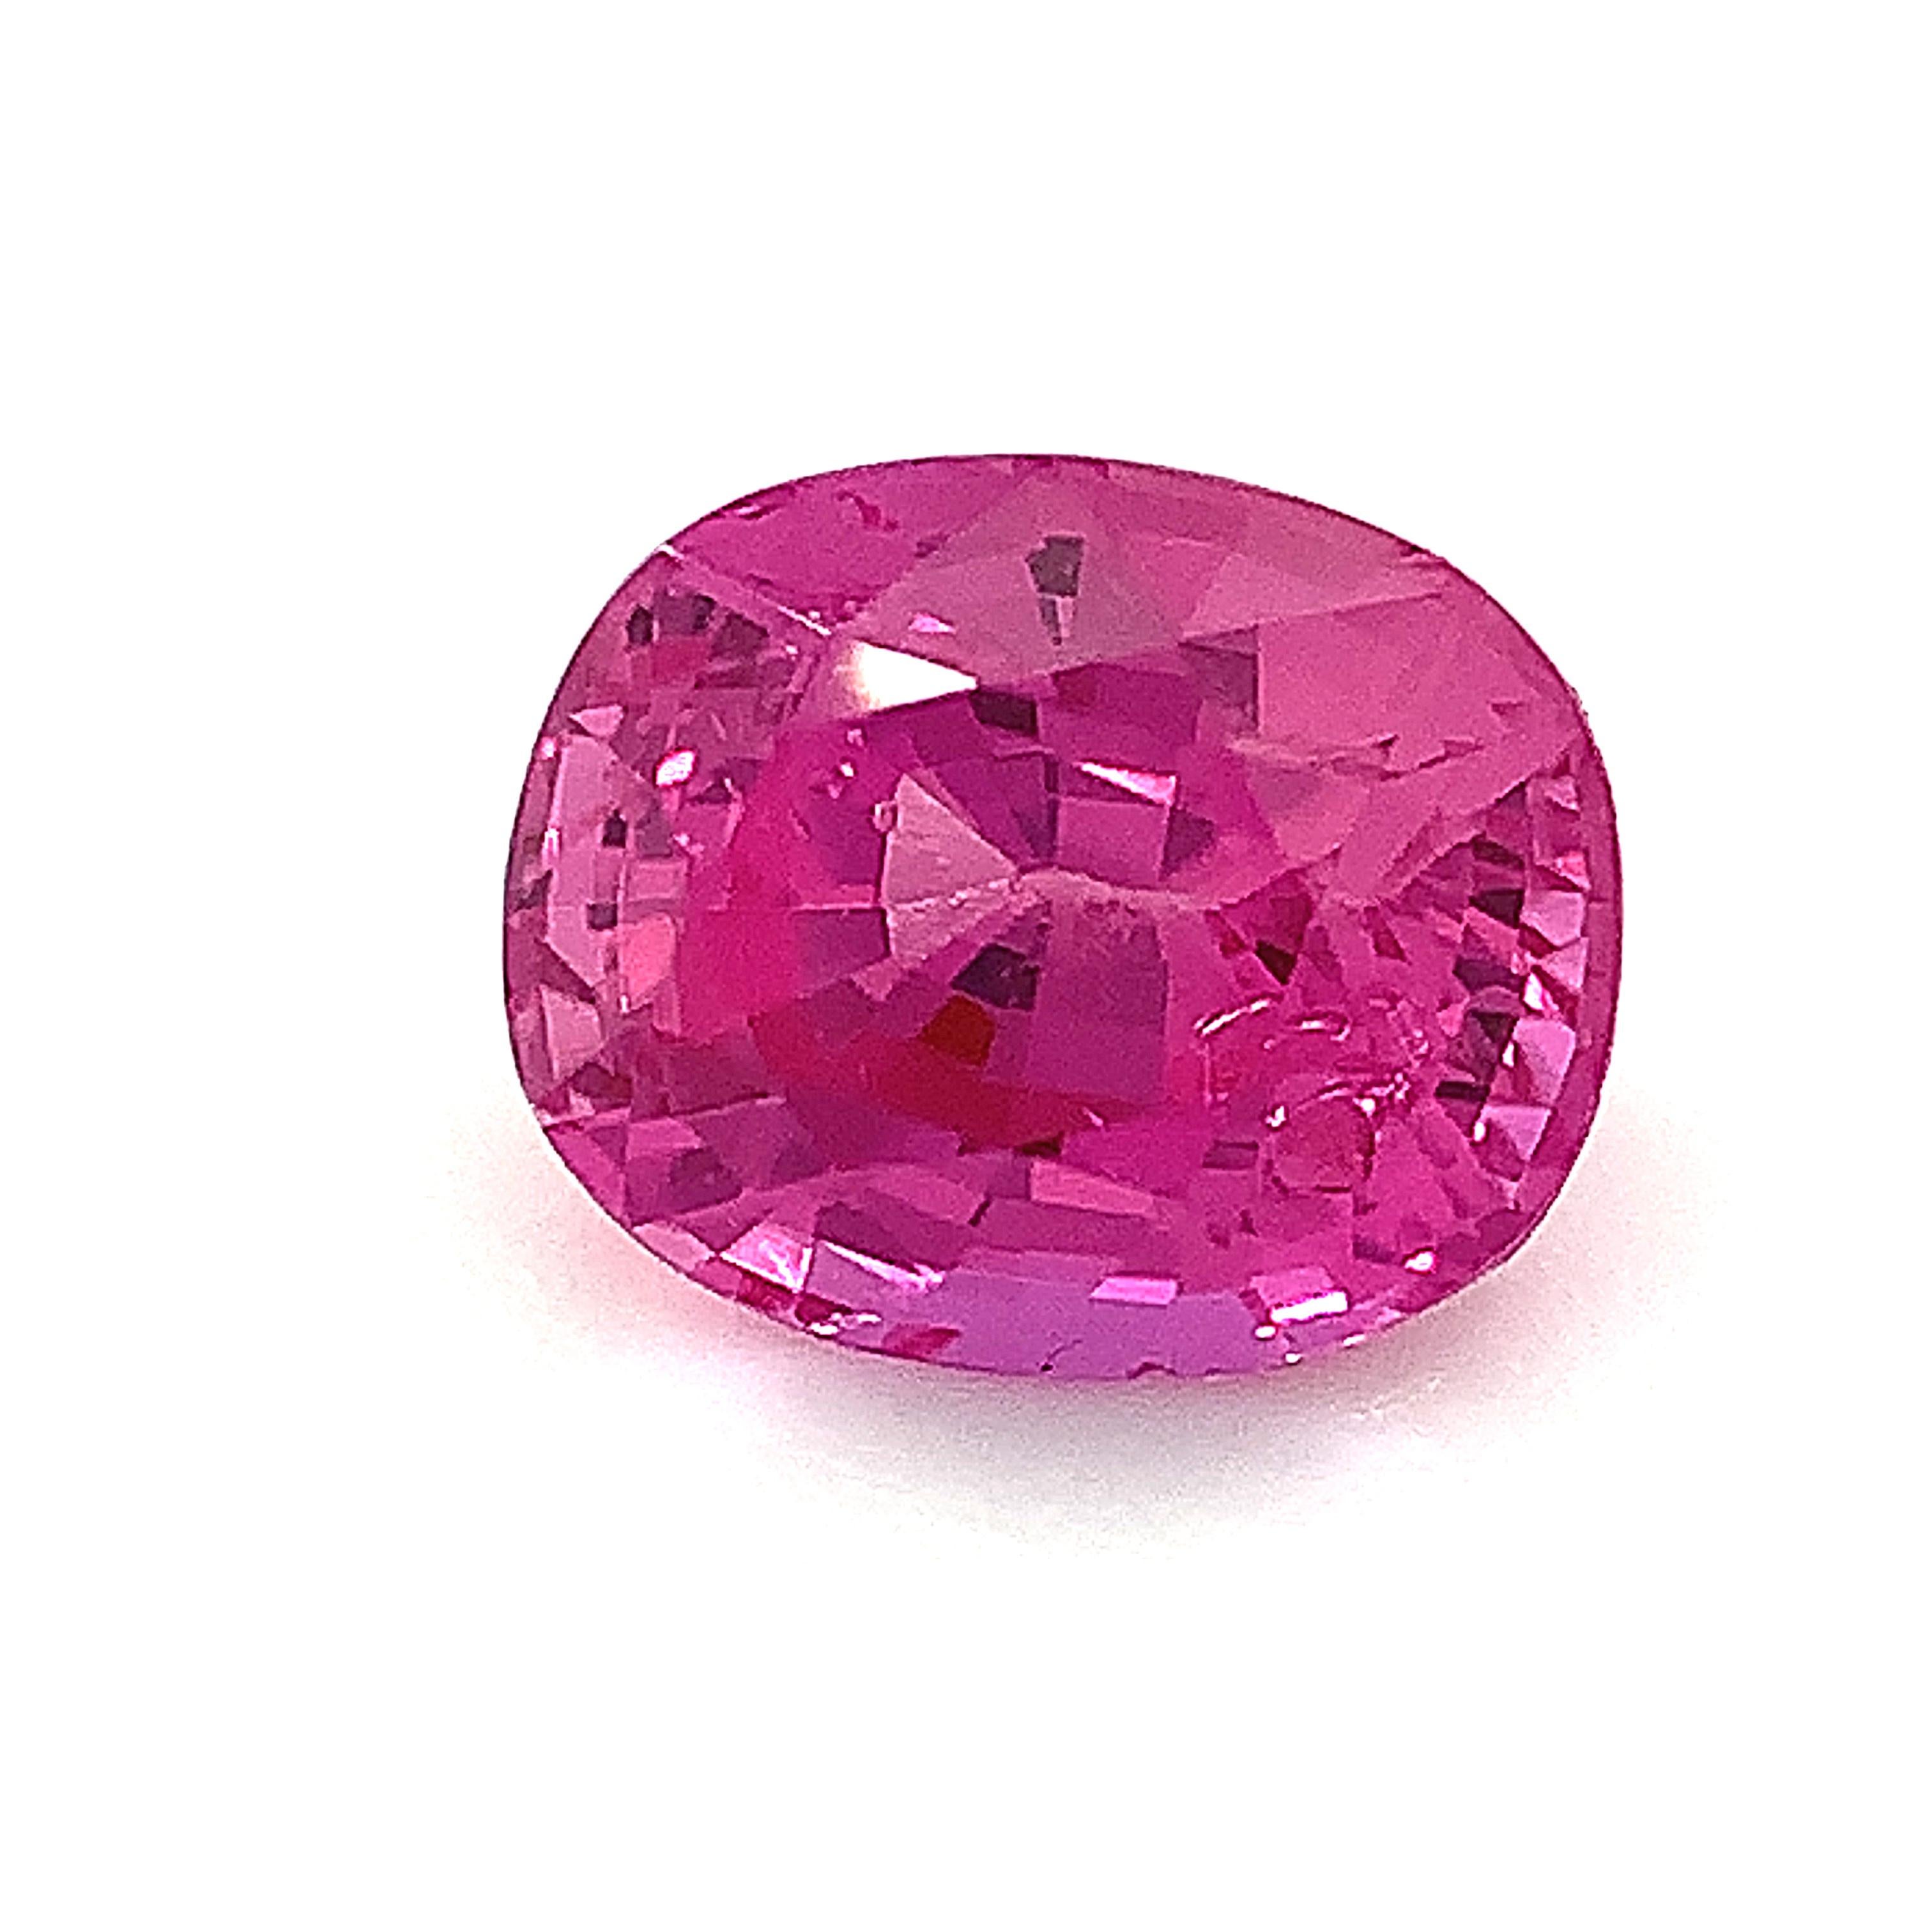 Unheated 1.39 Carat Burmese Pink Sapphire, Unset Loose Gemstone, GIA Certified For Sale 3